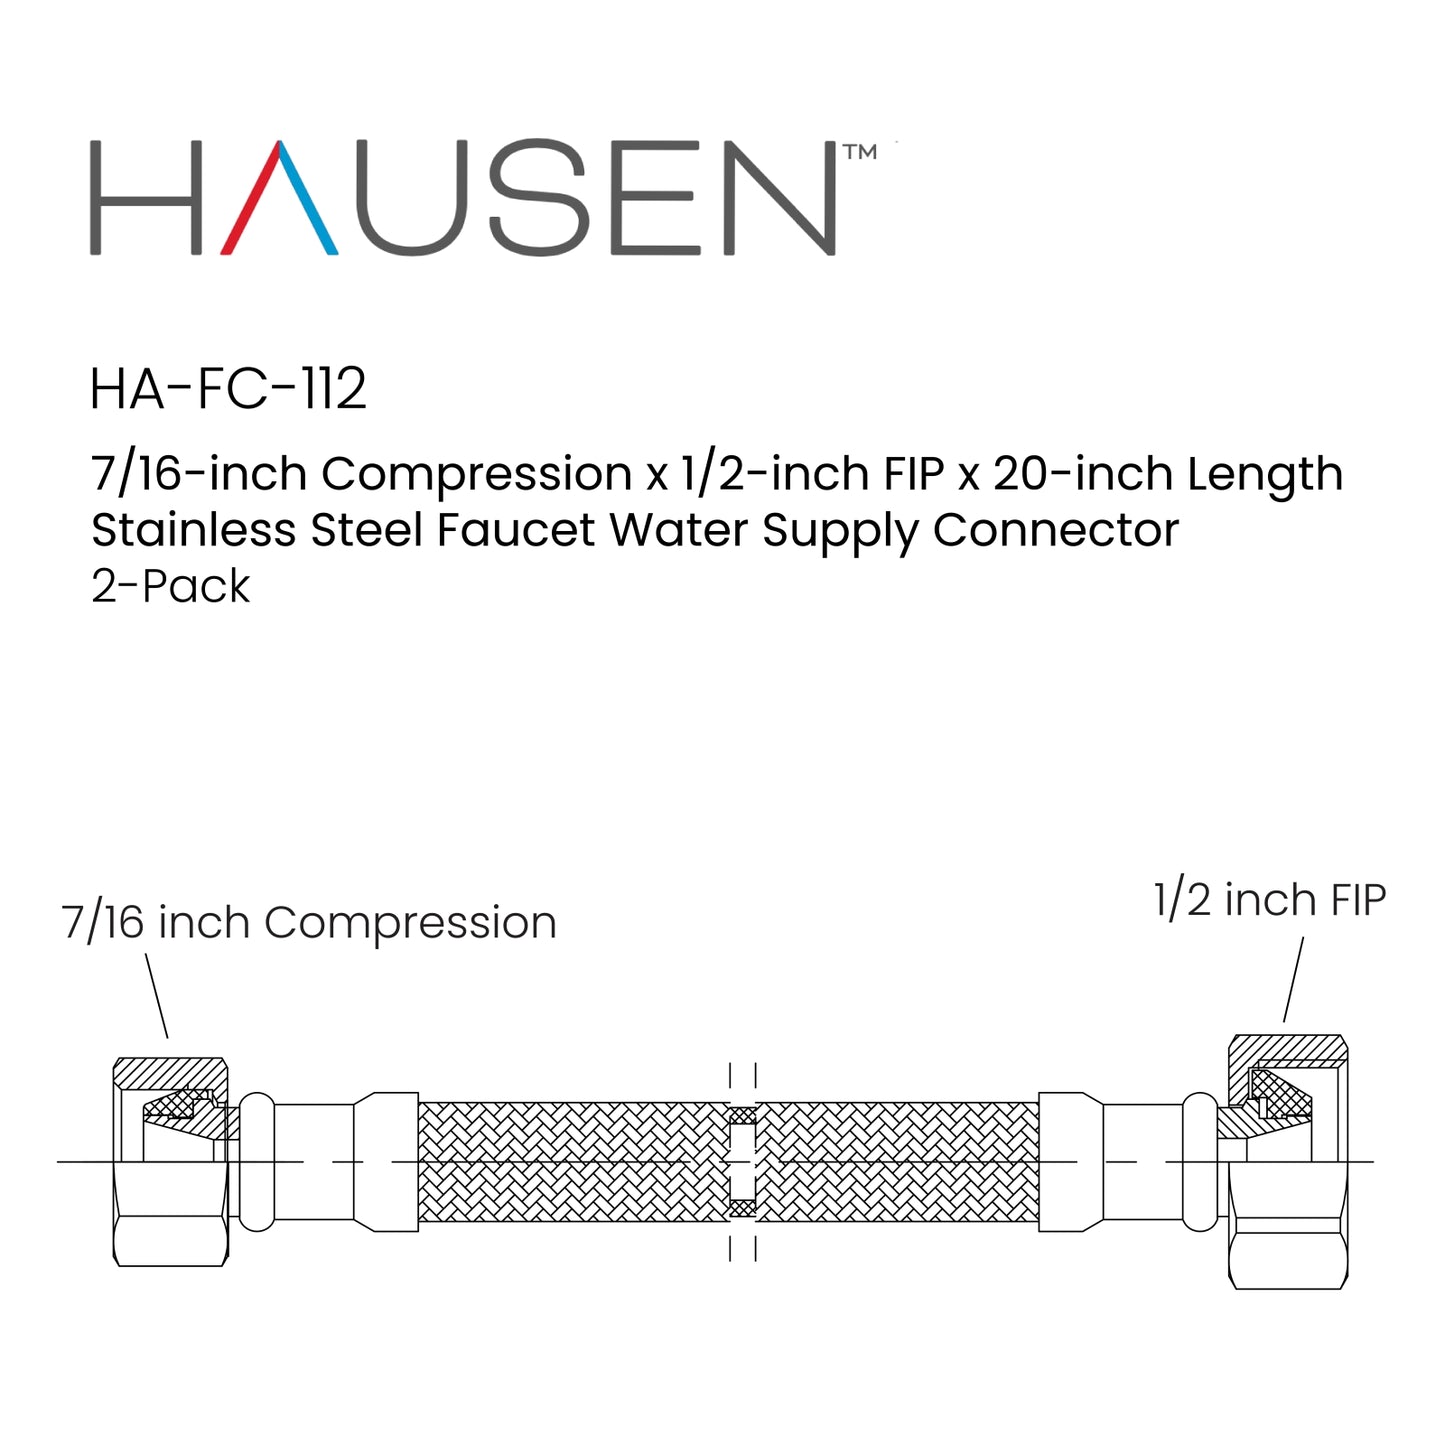 Hausen 7/16-inch Compression x 1/2-inch FIP (Female Iron Pipe) x 20-inch Length Stainless Steel Faucet Water Supply Connector; Lead Free; cUPC and NSF-61 Certified; Compatible with Standard Faucets, 2-Pack